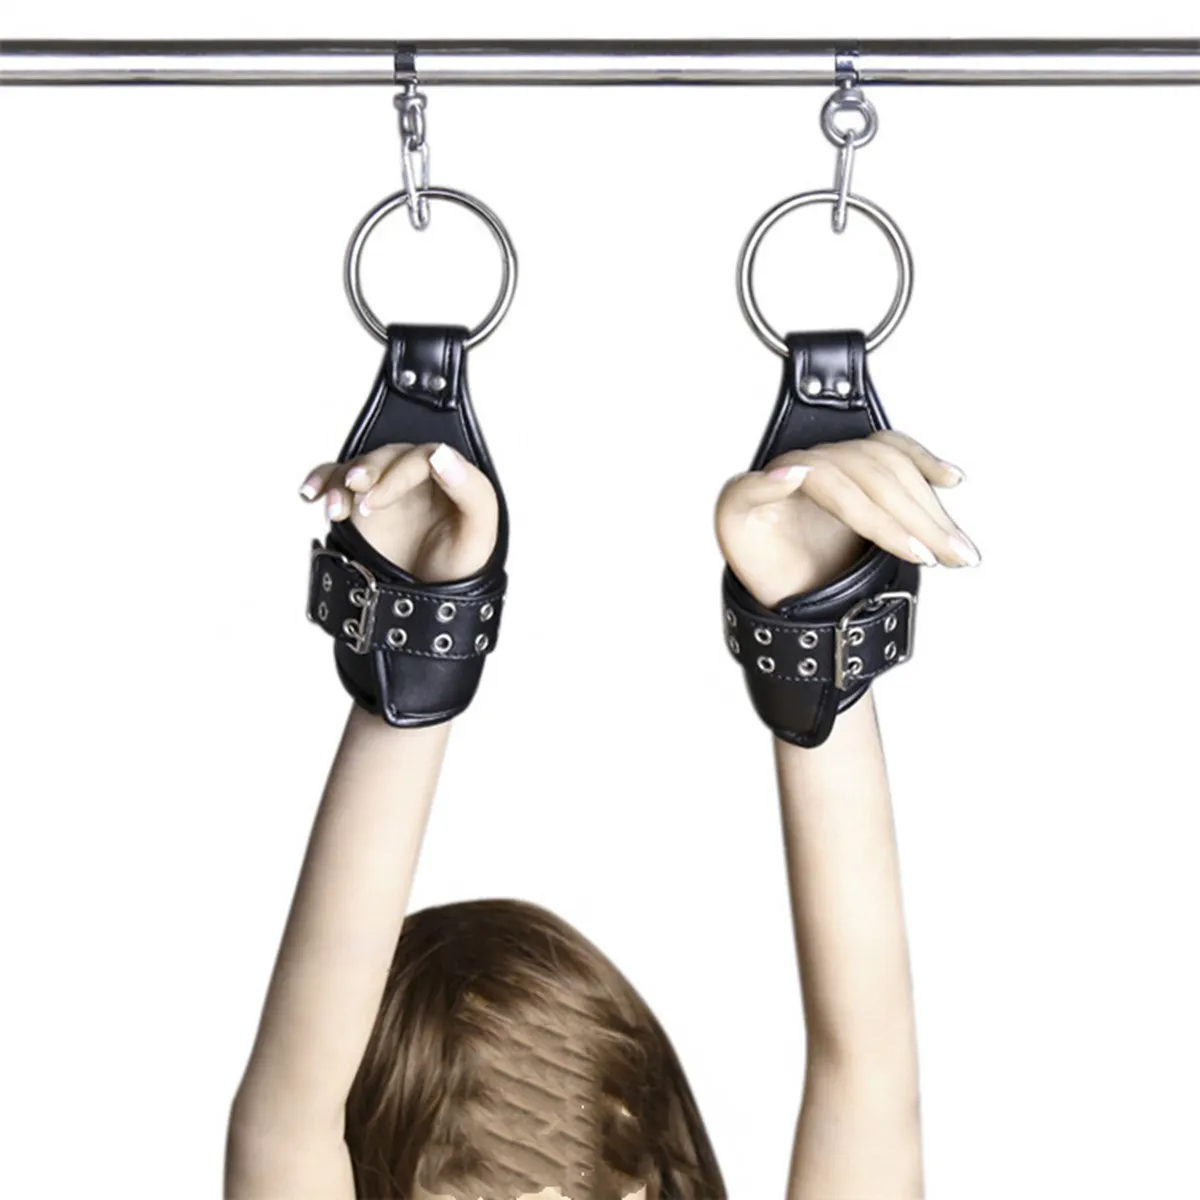 sexy toys for woman Leather Ankle Wrist Suspension Cuffs Restraint BDSM Bondage Strap Keep Suspended Hanging Handcuffs9618025